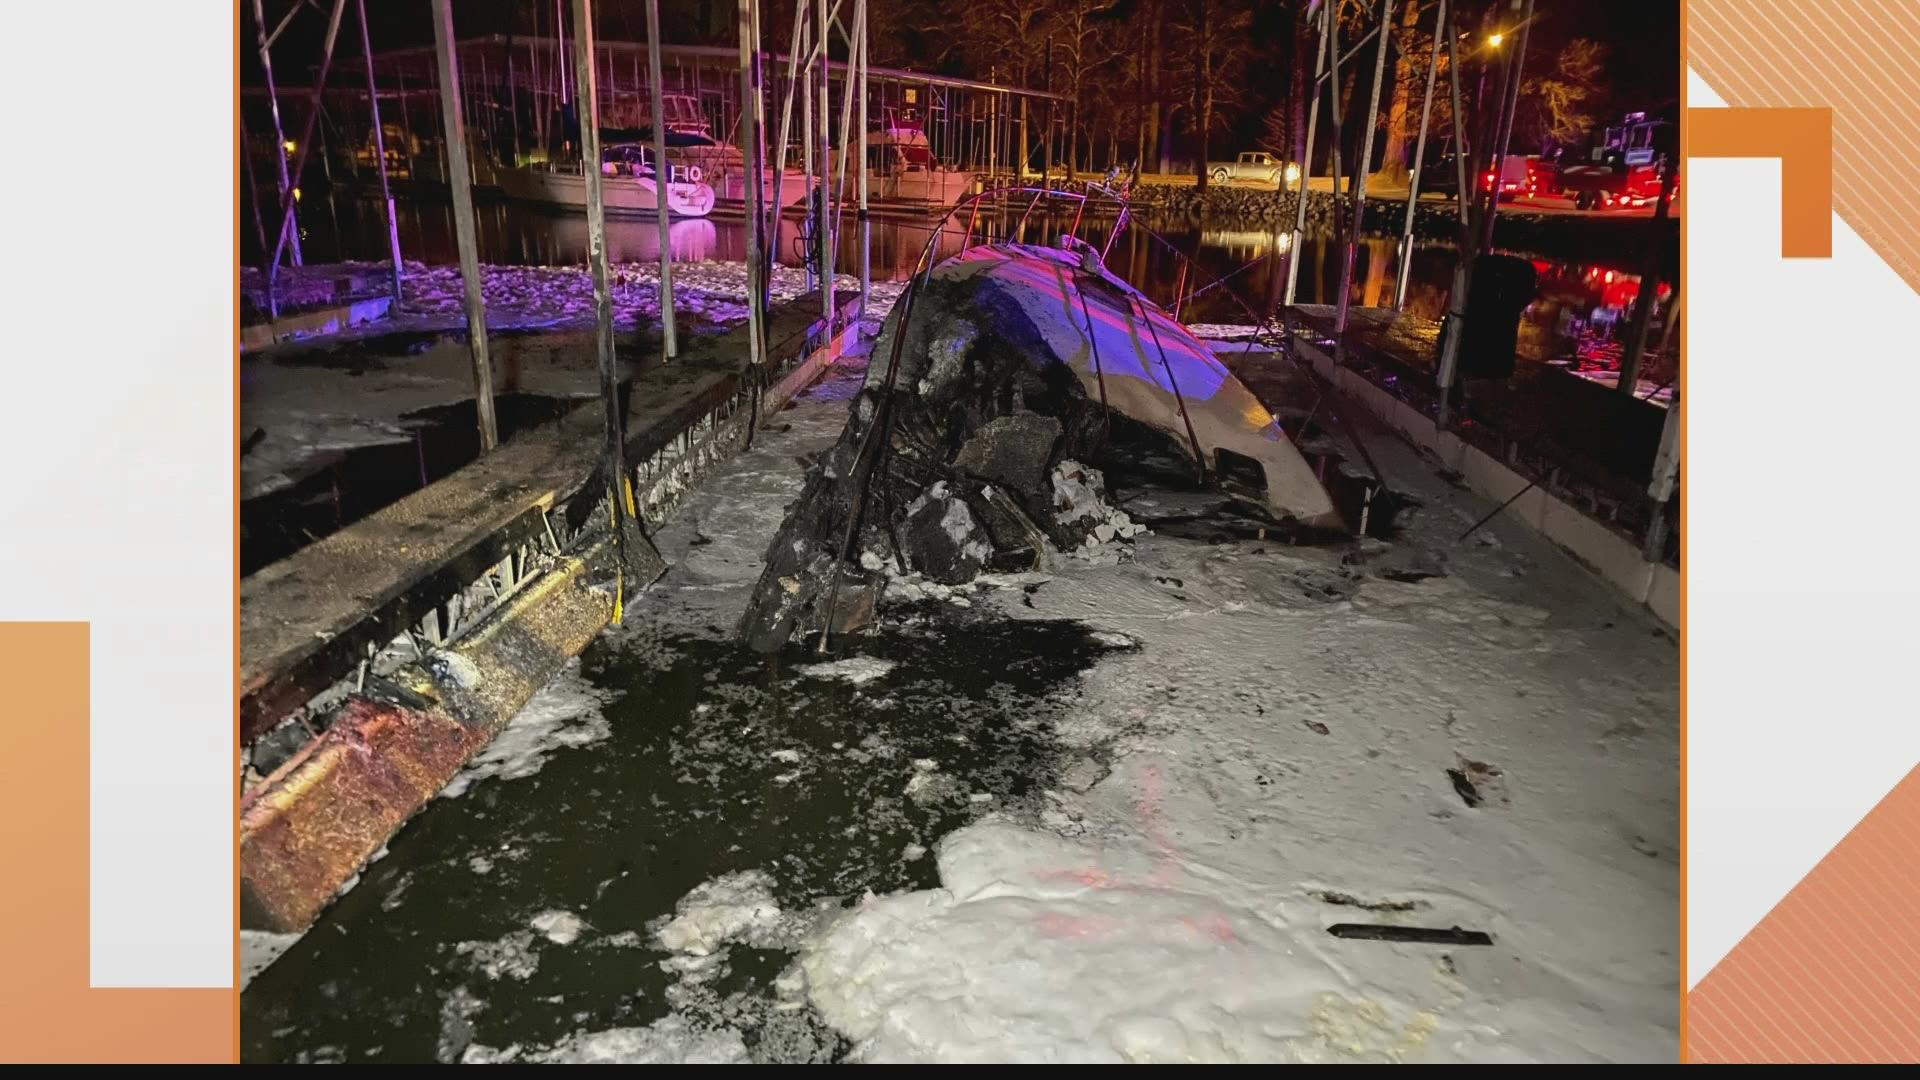 A dock fire broke out Wednesday night at a West Alton marina. The cause of the fire is still under investigation.